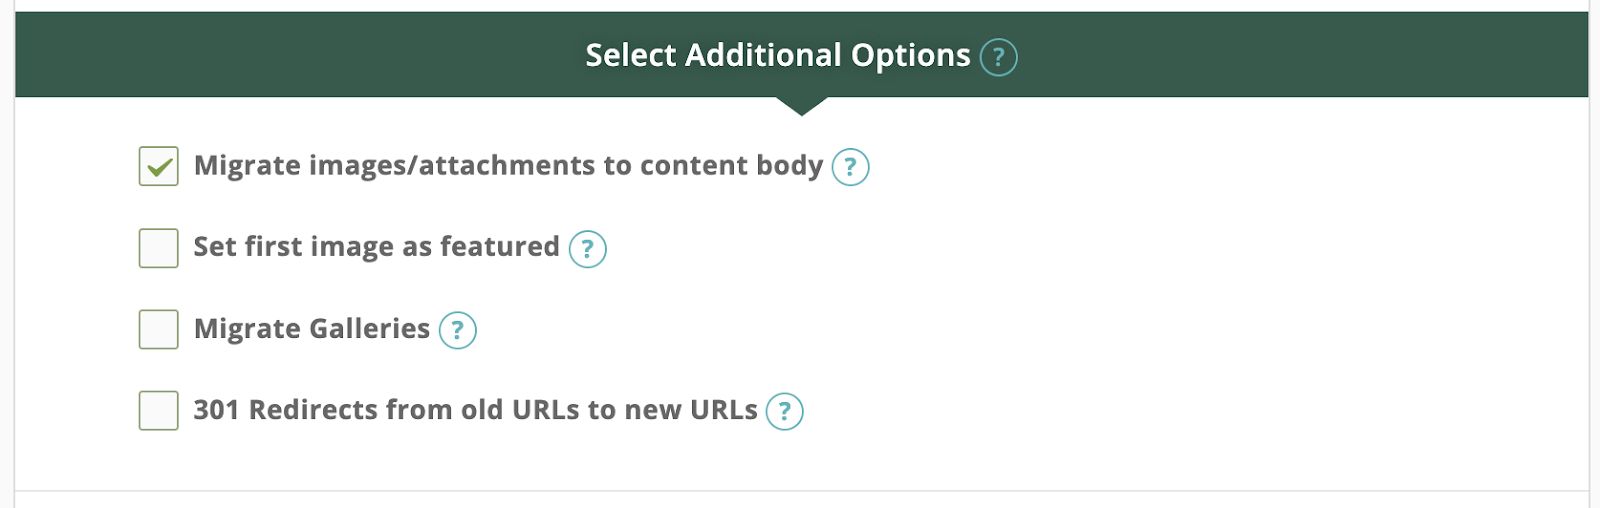 You can select additional options here as well. Please note that if you are using a free Wix URL, you cannot redirect the old URL to the new URL.